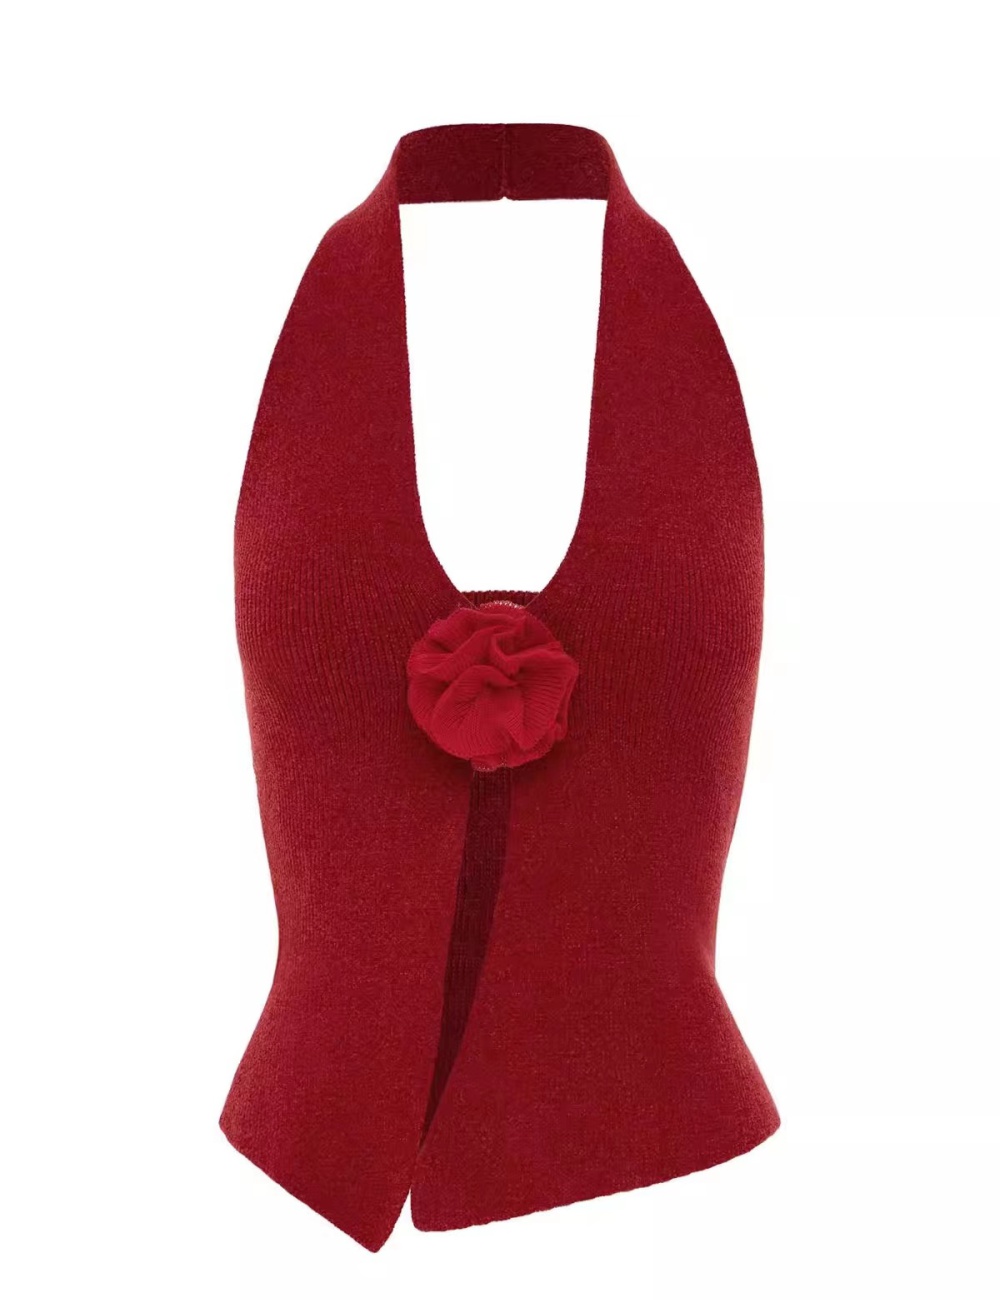 Low-cut stereoscopic red tops retro sling summer vest